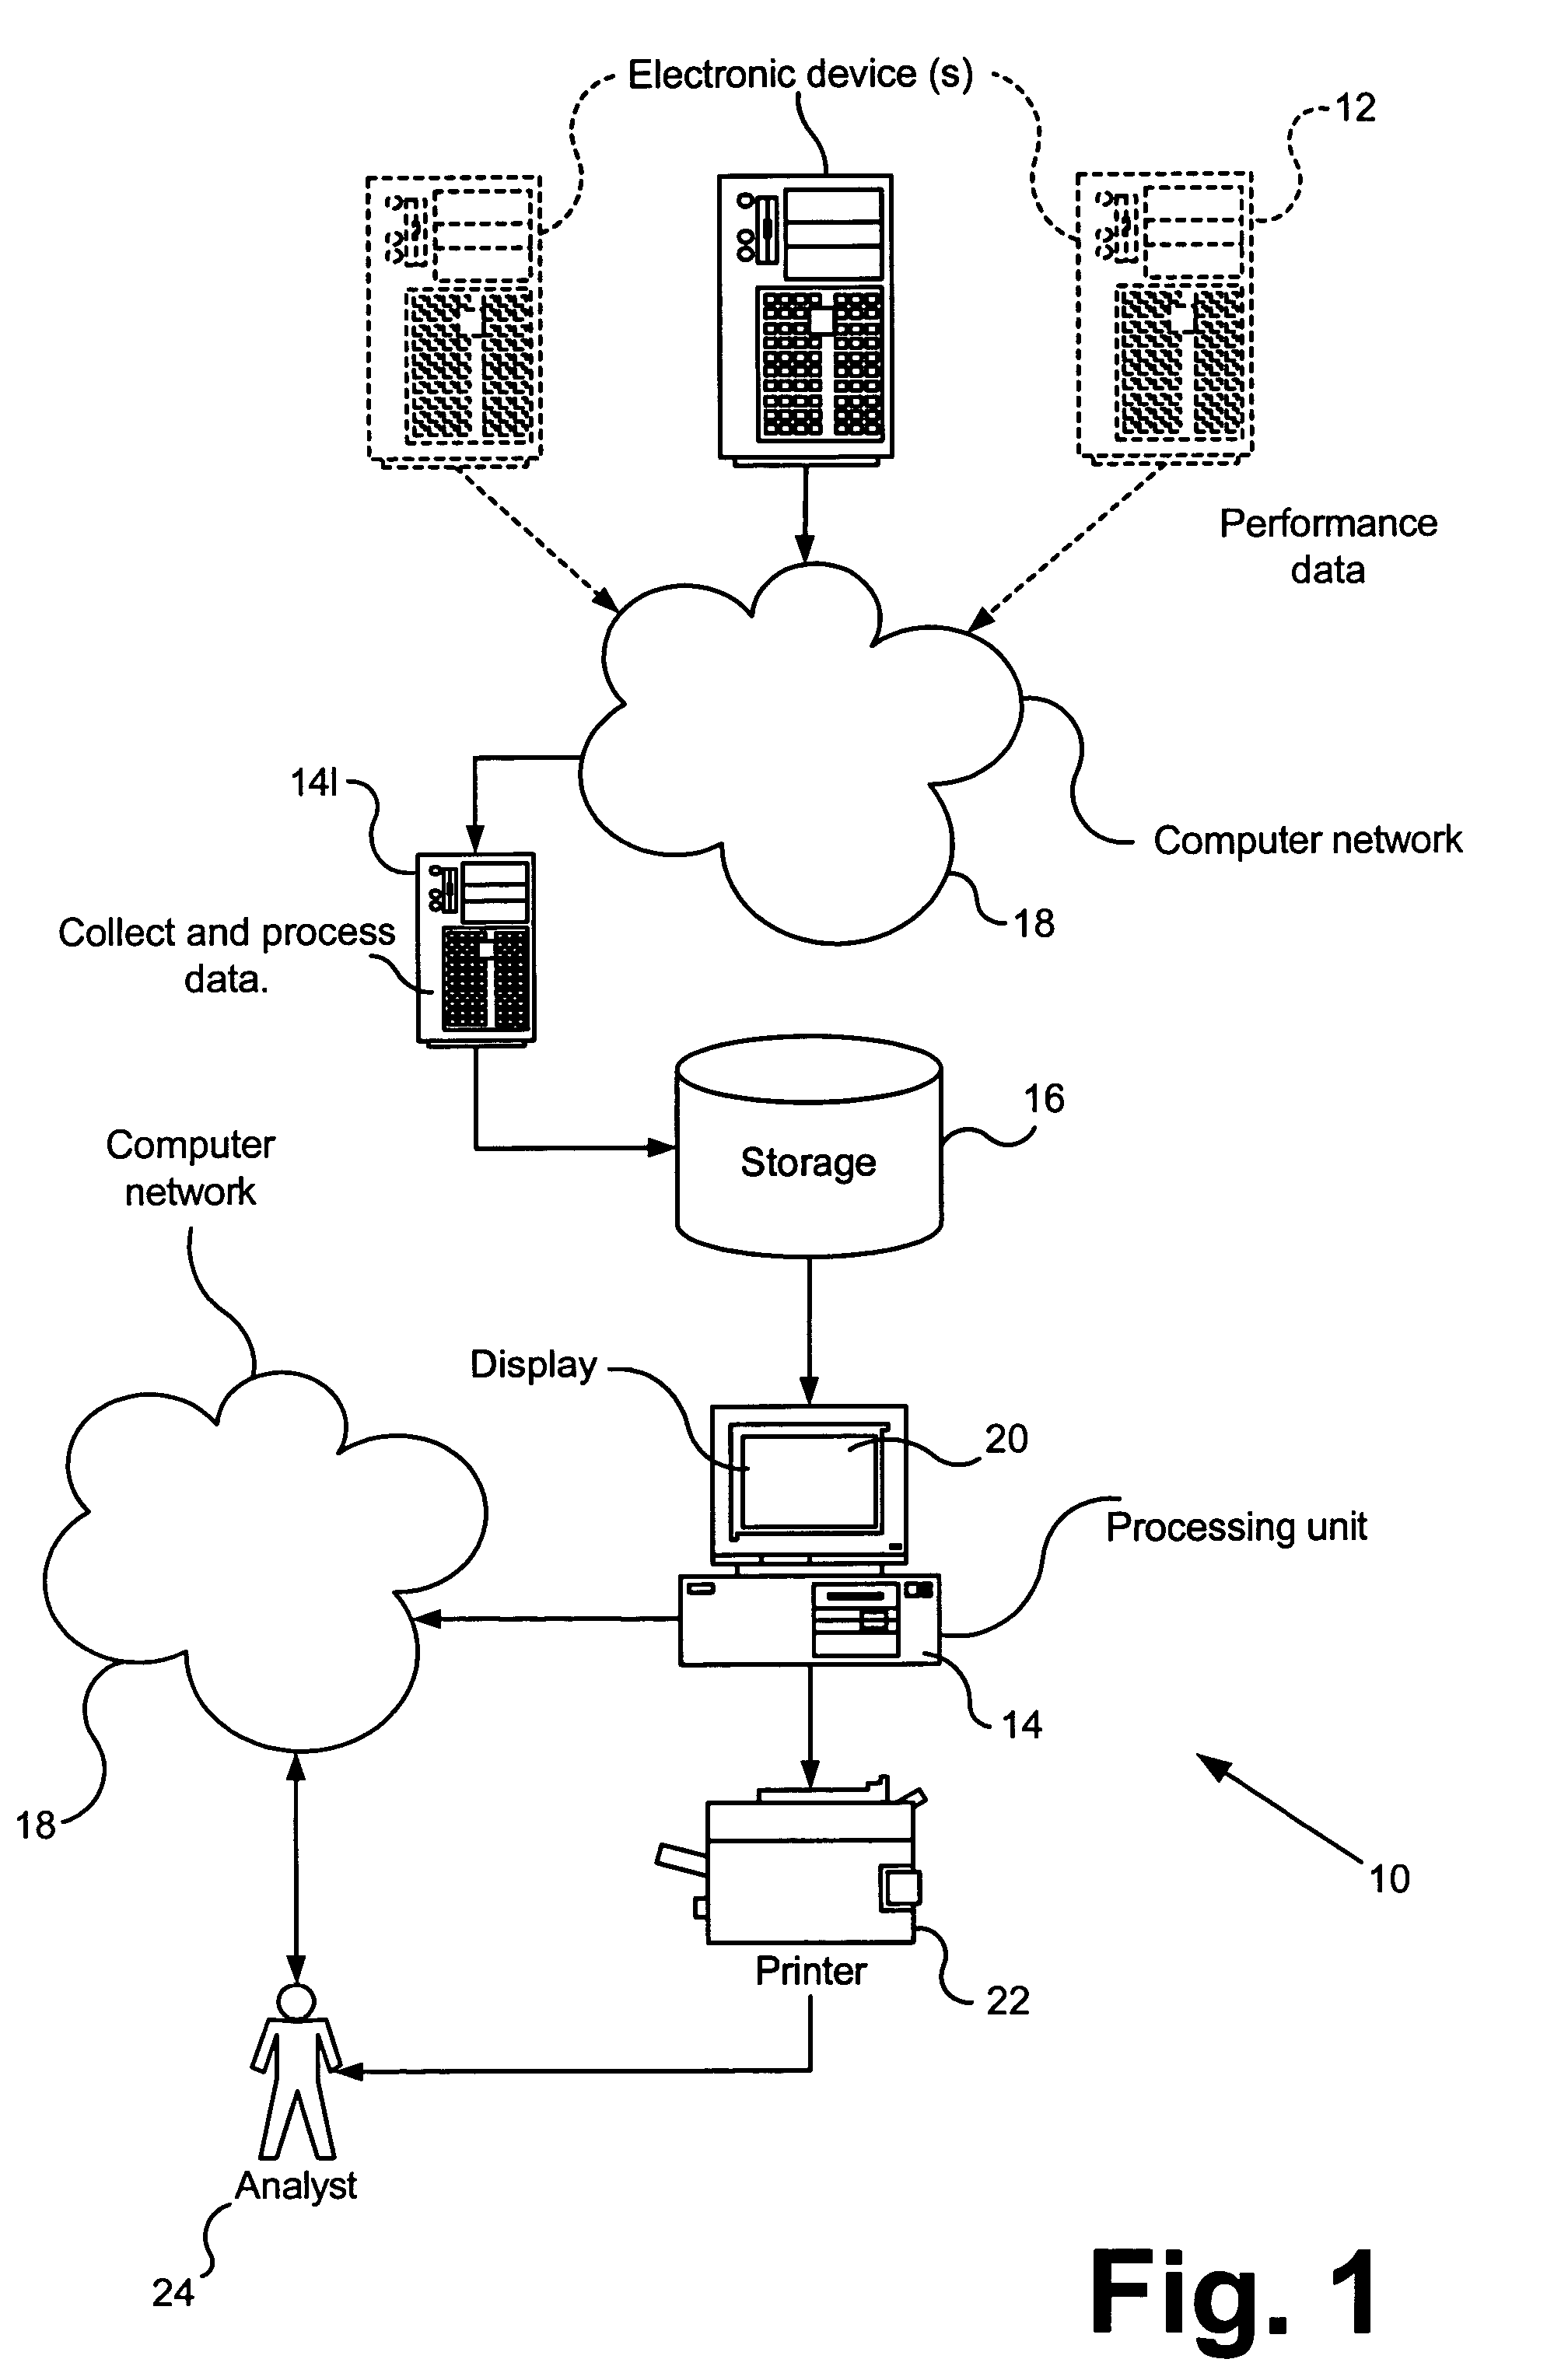 Apparatus and method for managing the performance of an electronic device